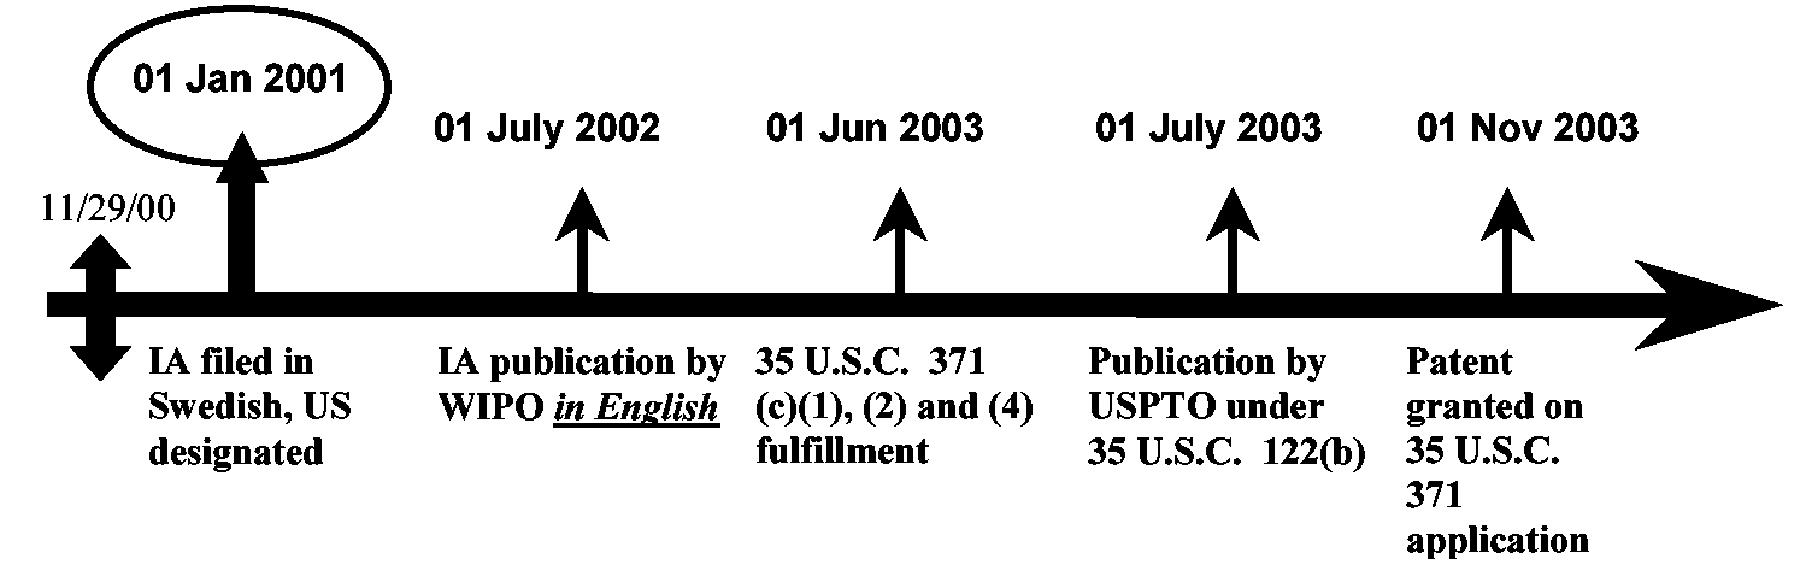 Example 4: References based on the national stage (35 U.S.C. 371) of an International Application filed on or after November 29, 2000 and which was published in English under PCT Article 21(2).